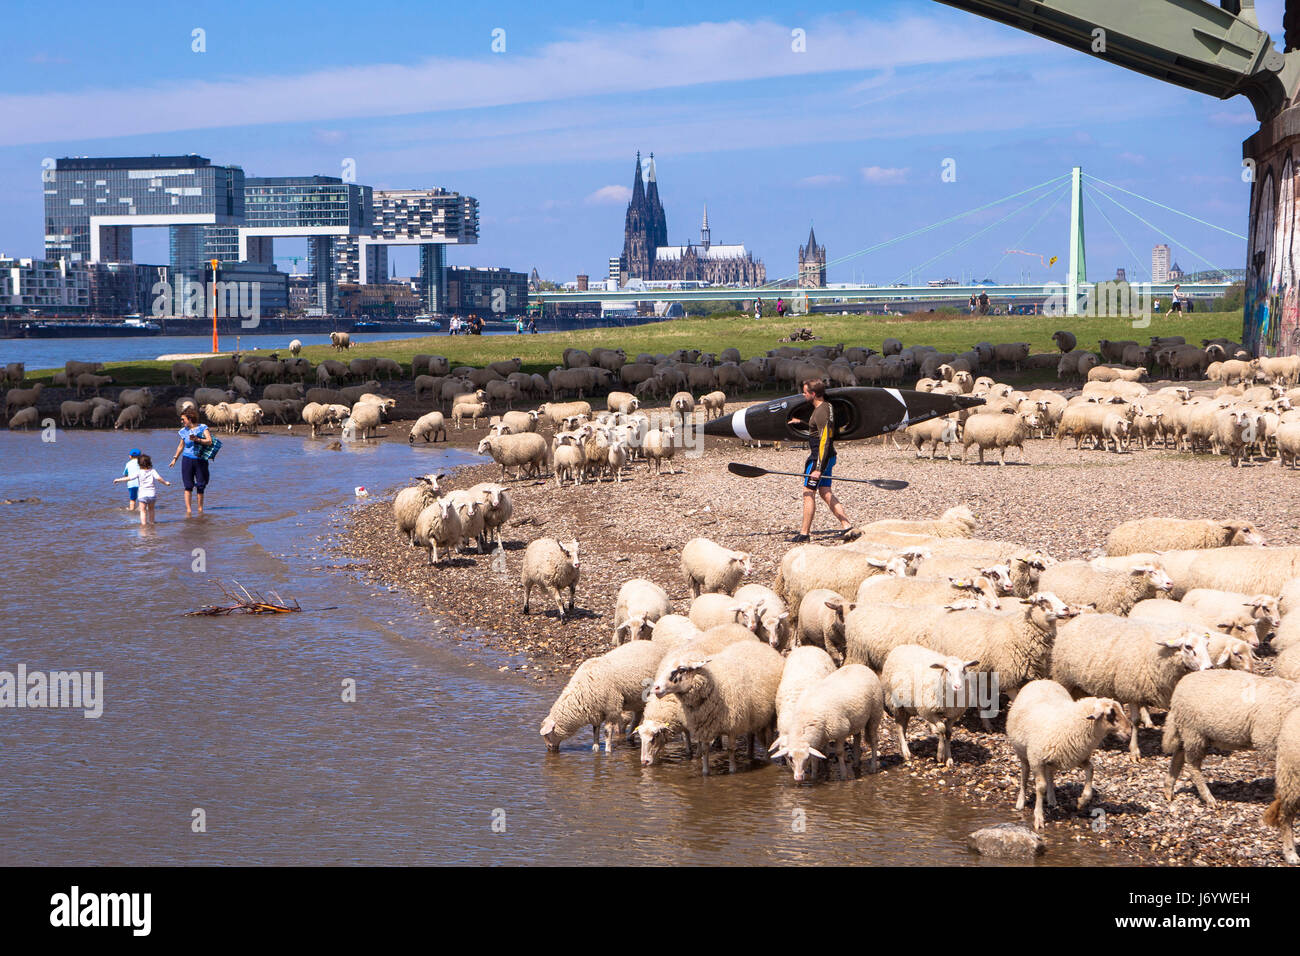 Germany, Cologne, sheep on the river Rhine meadows in the district Deutz, the Crane Houses in the Rheinau harbor, the cathedral. Stock Photo